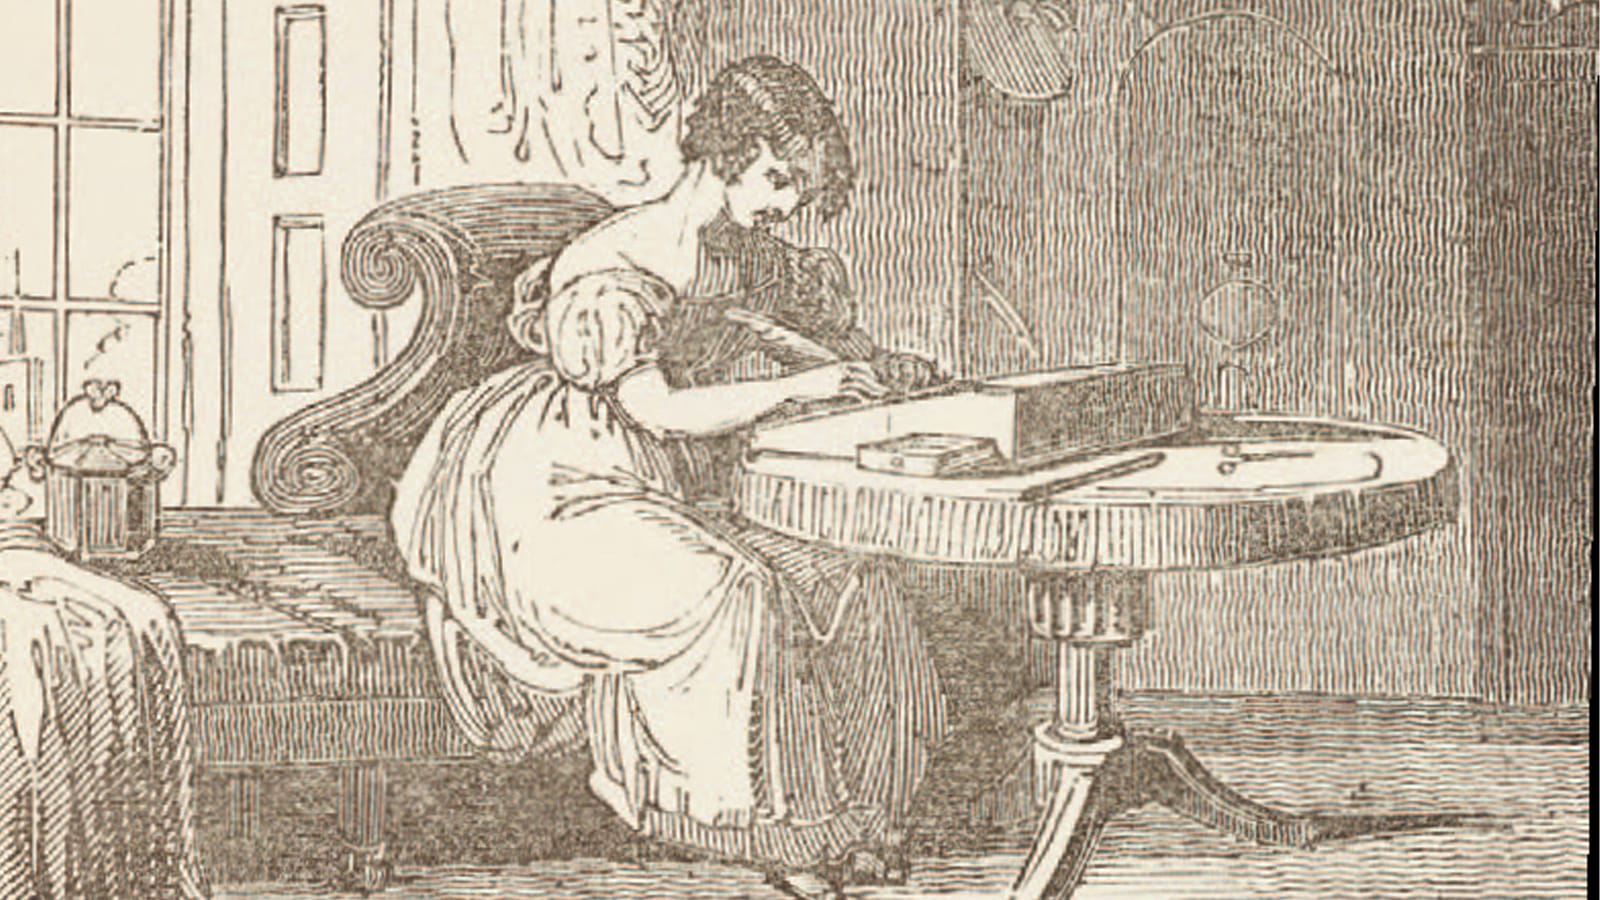 A manuscript drawing of a woman writing a letter